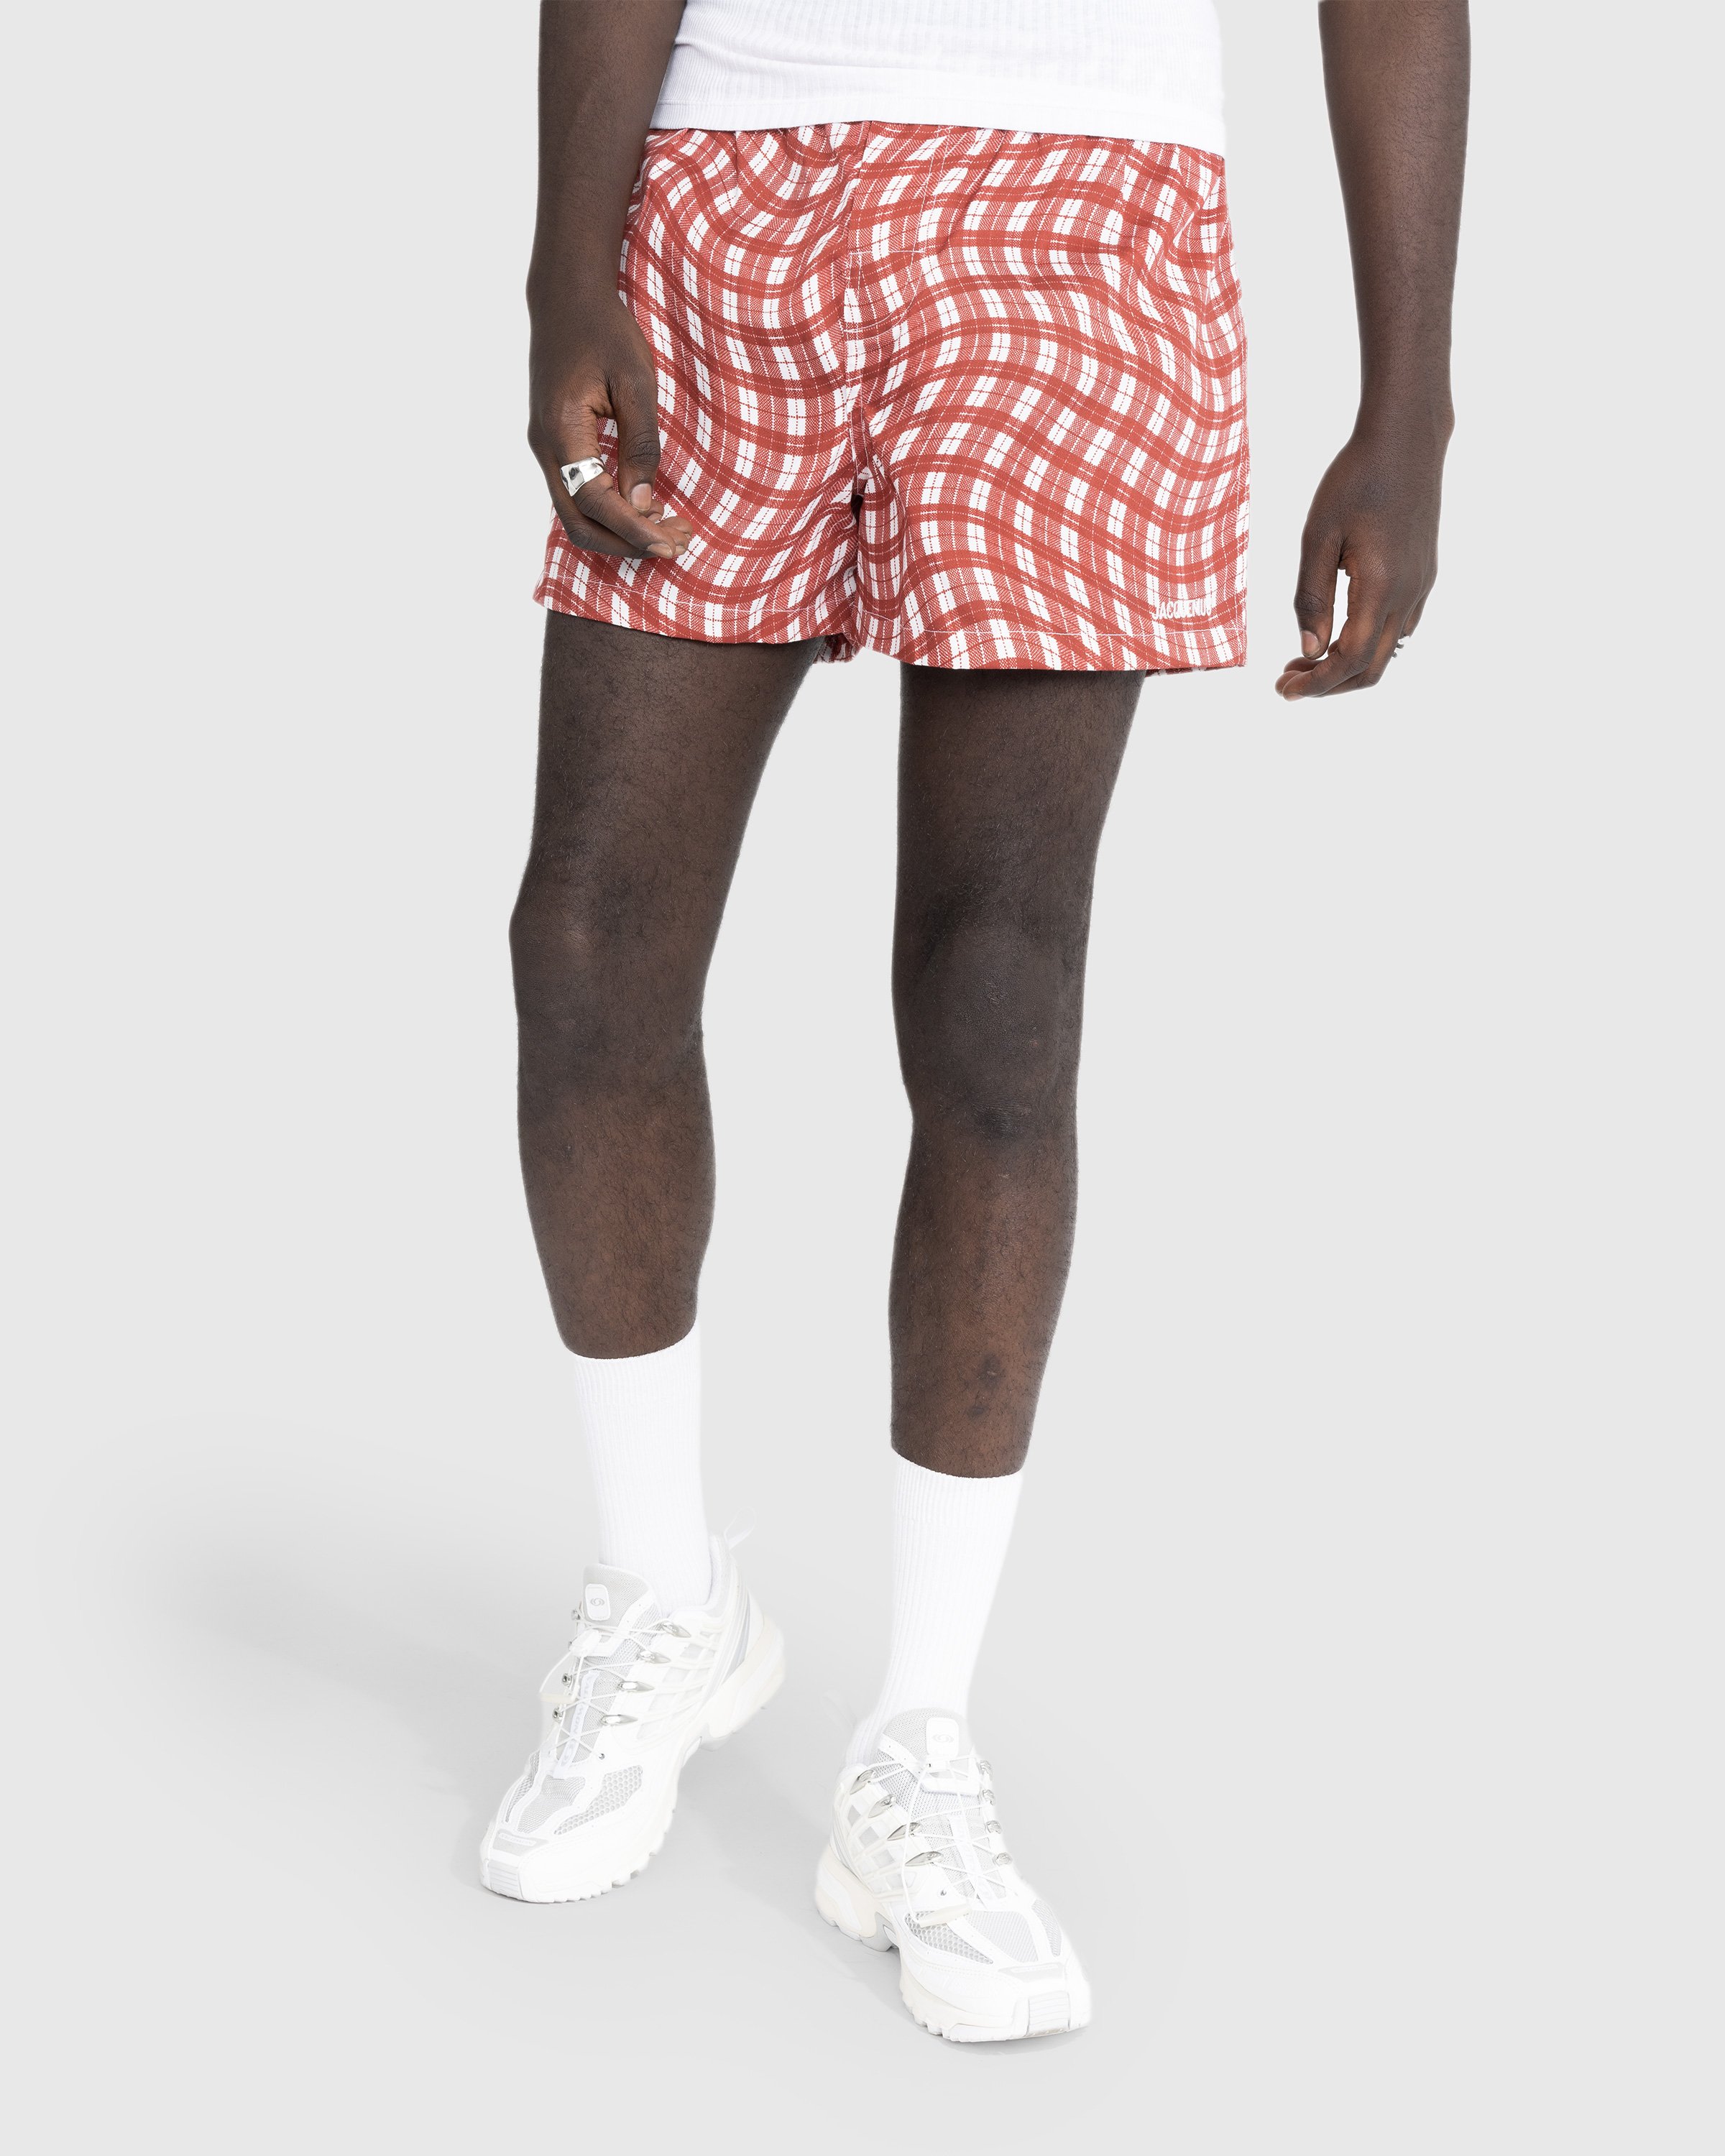 JACQUEMUS - Le Caleçon Print Dark Red Deformed Check - Clothing - Red - Image 2